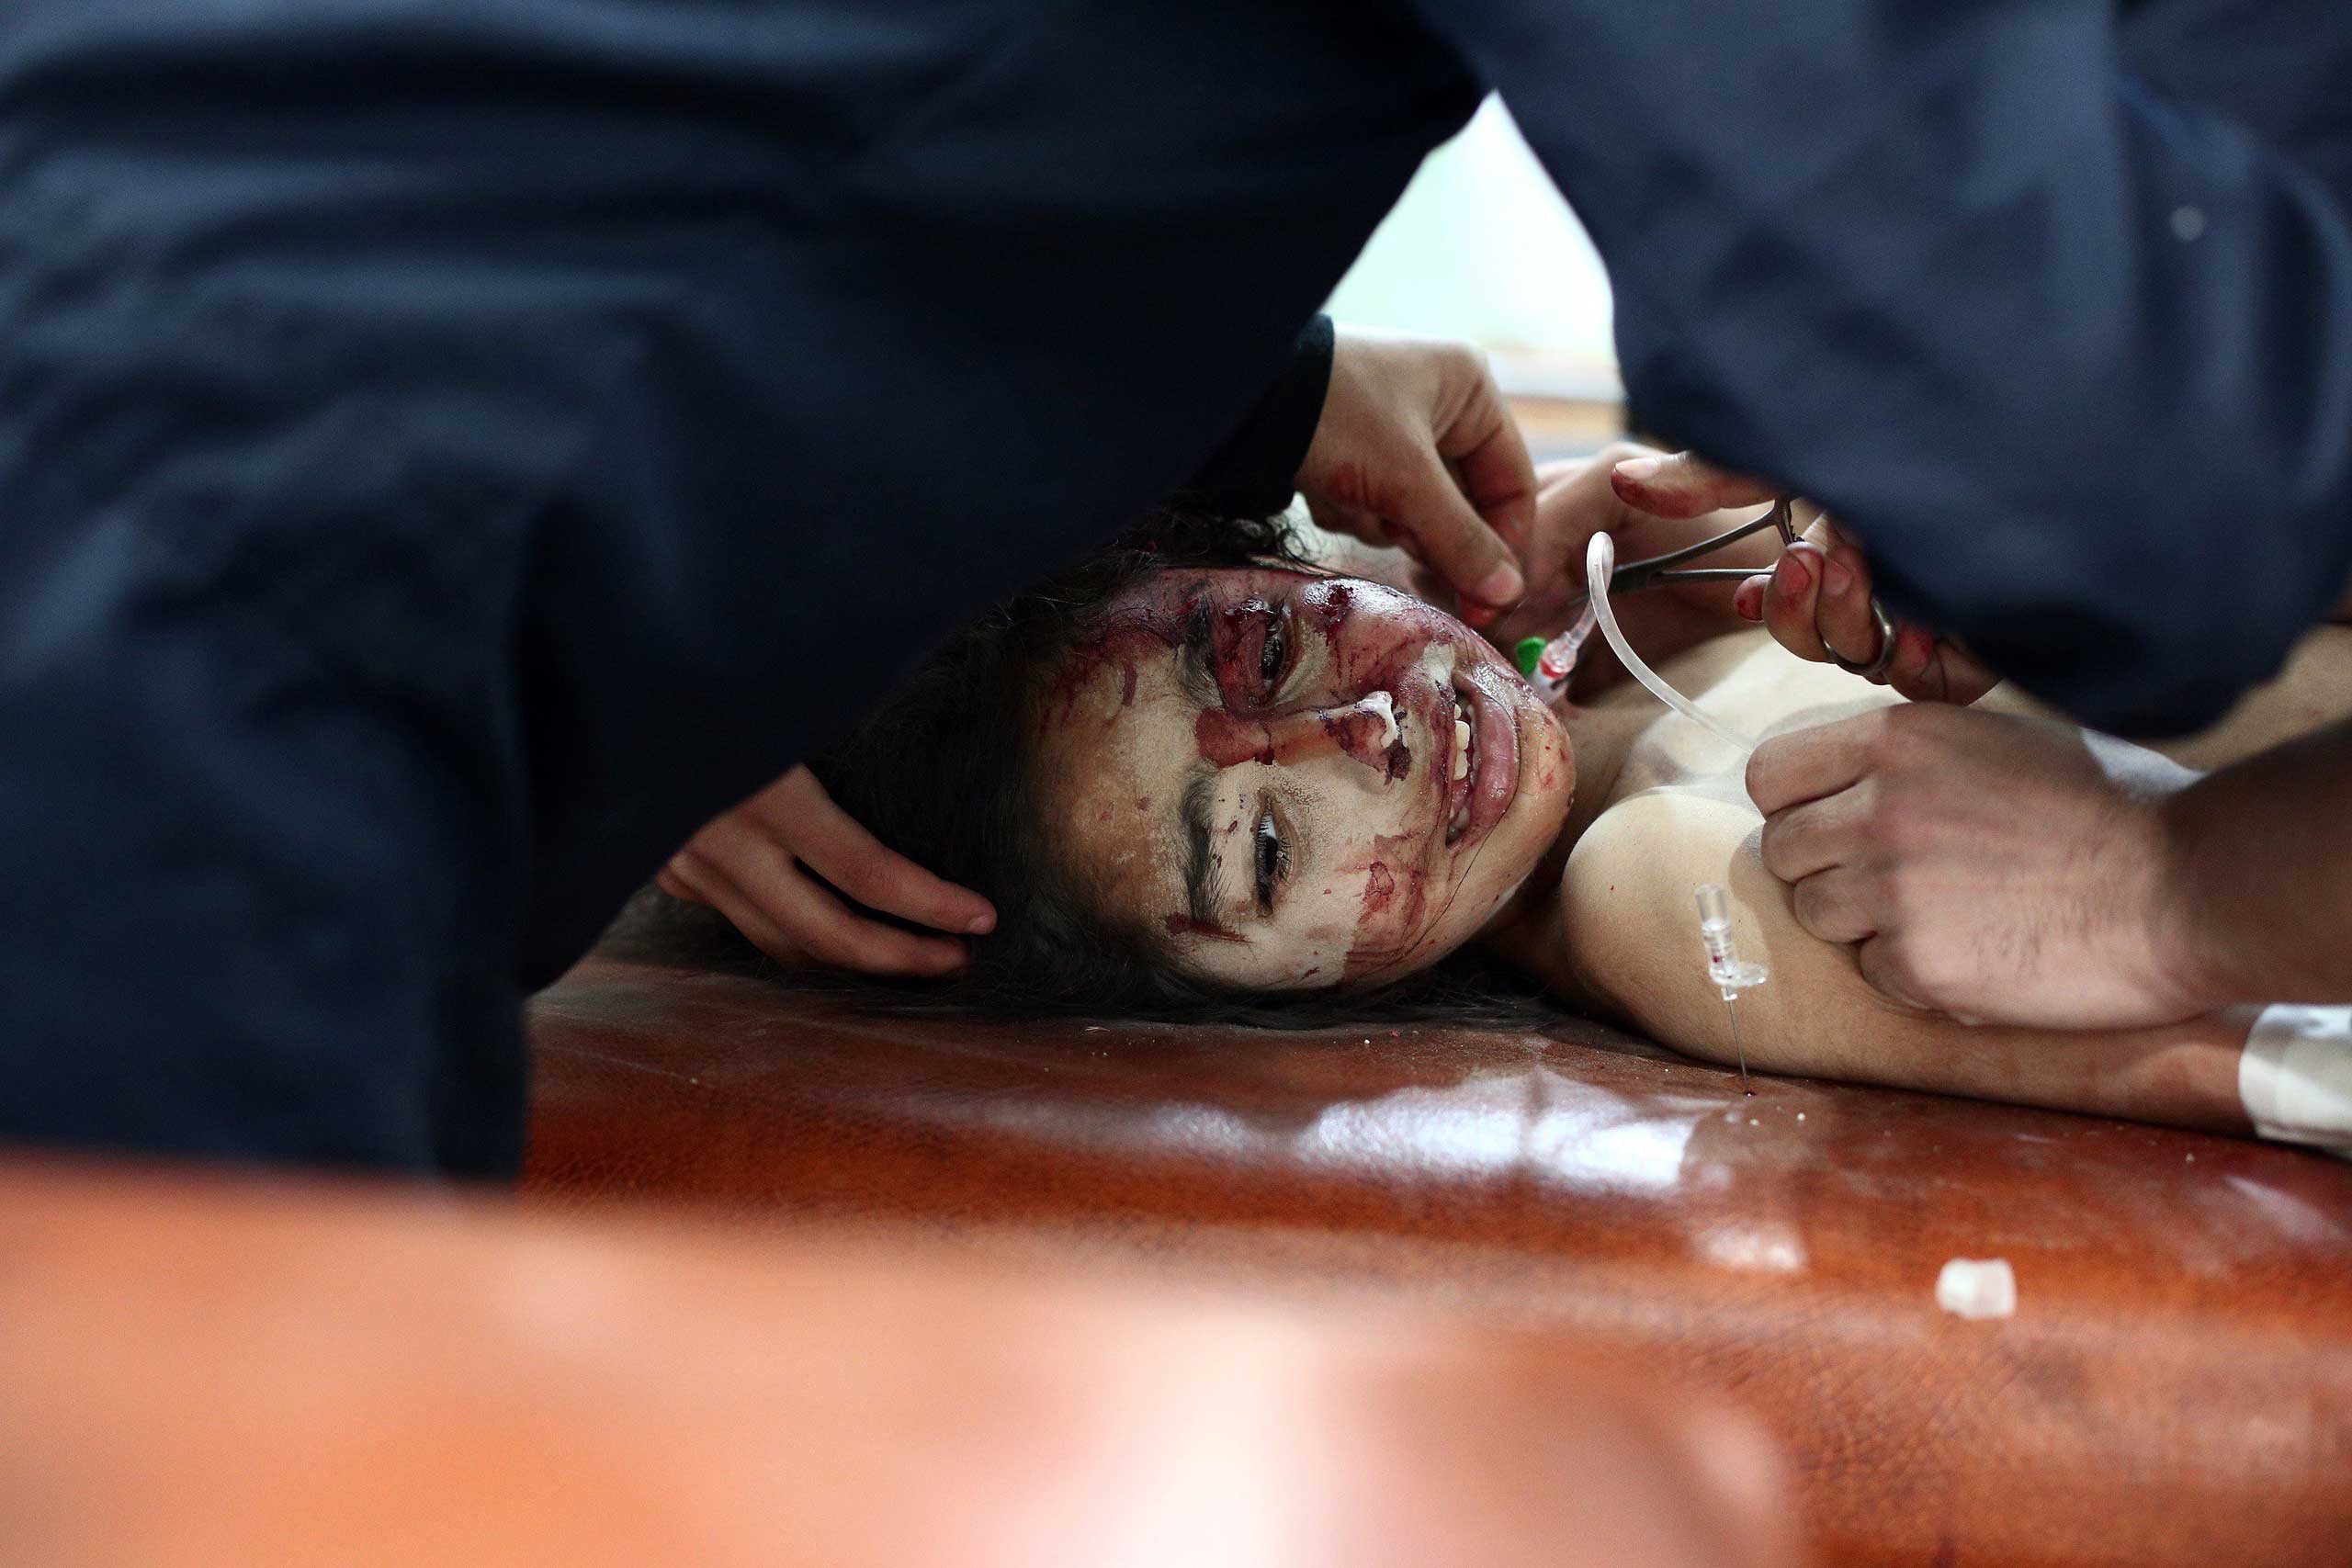 Nov. 7, 2014. A Syrian girl is treated at a make-shift hospital, following a reported regime air raid in Eastern al-Ghouta, a rebel-held region outside the capital Damascus.